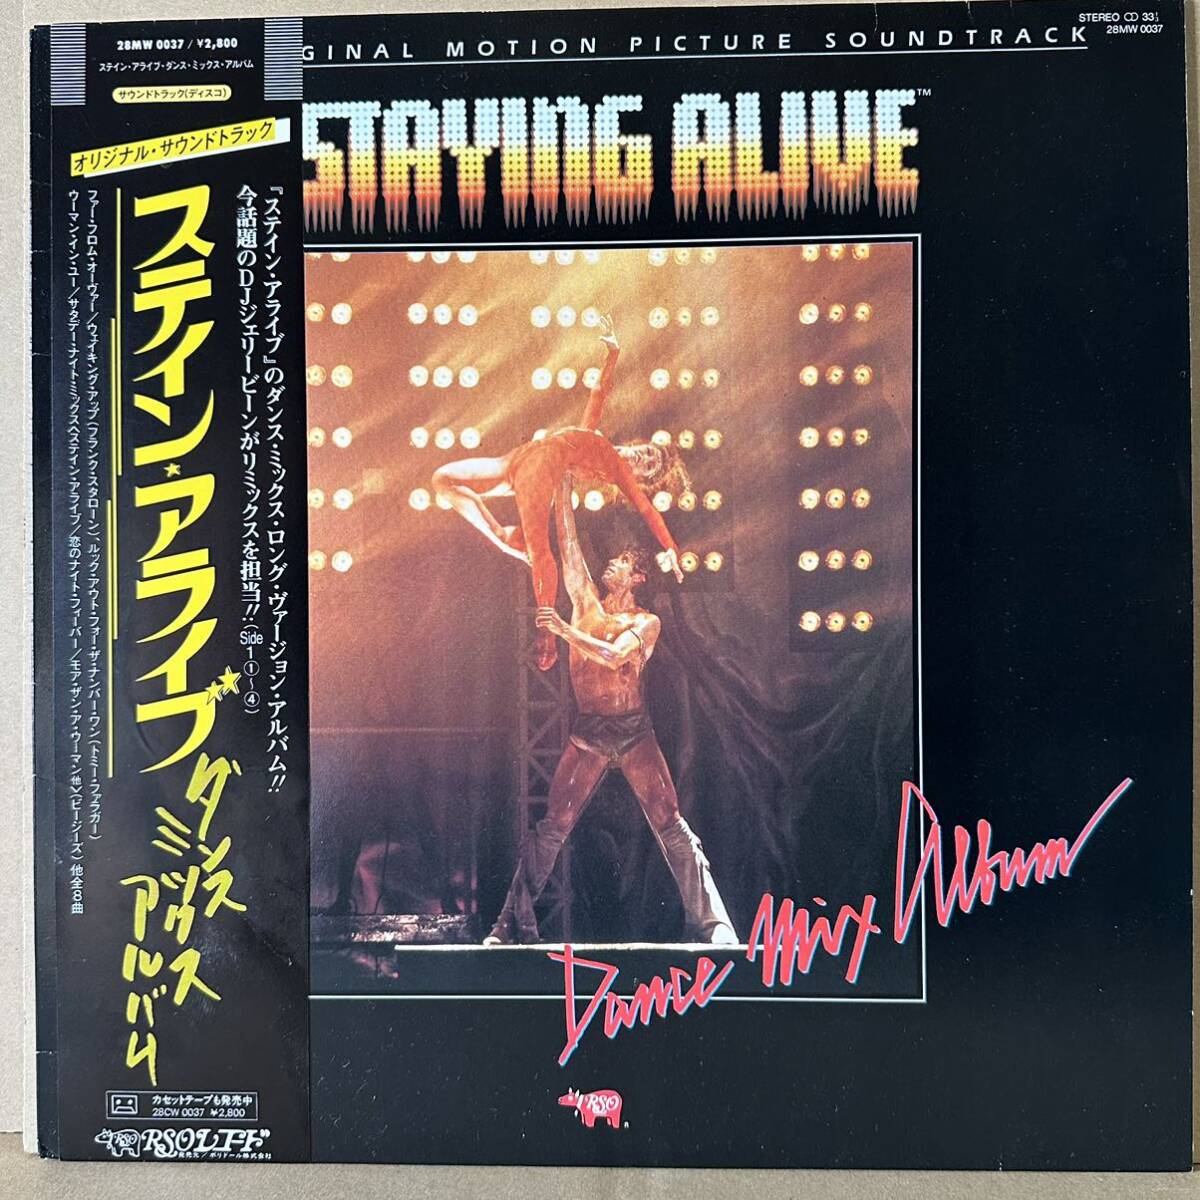 LP 帯付　SATURDAY NIGHT MIX / THE BEE GEES　☆ STAYING ALIVE　☆ FRANK STALLONE / FAR FROM OVER_画像1